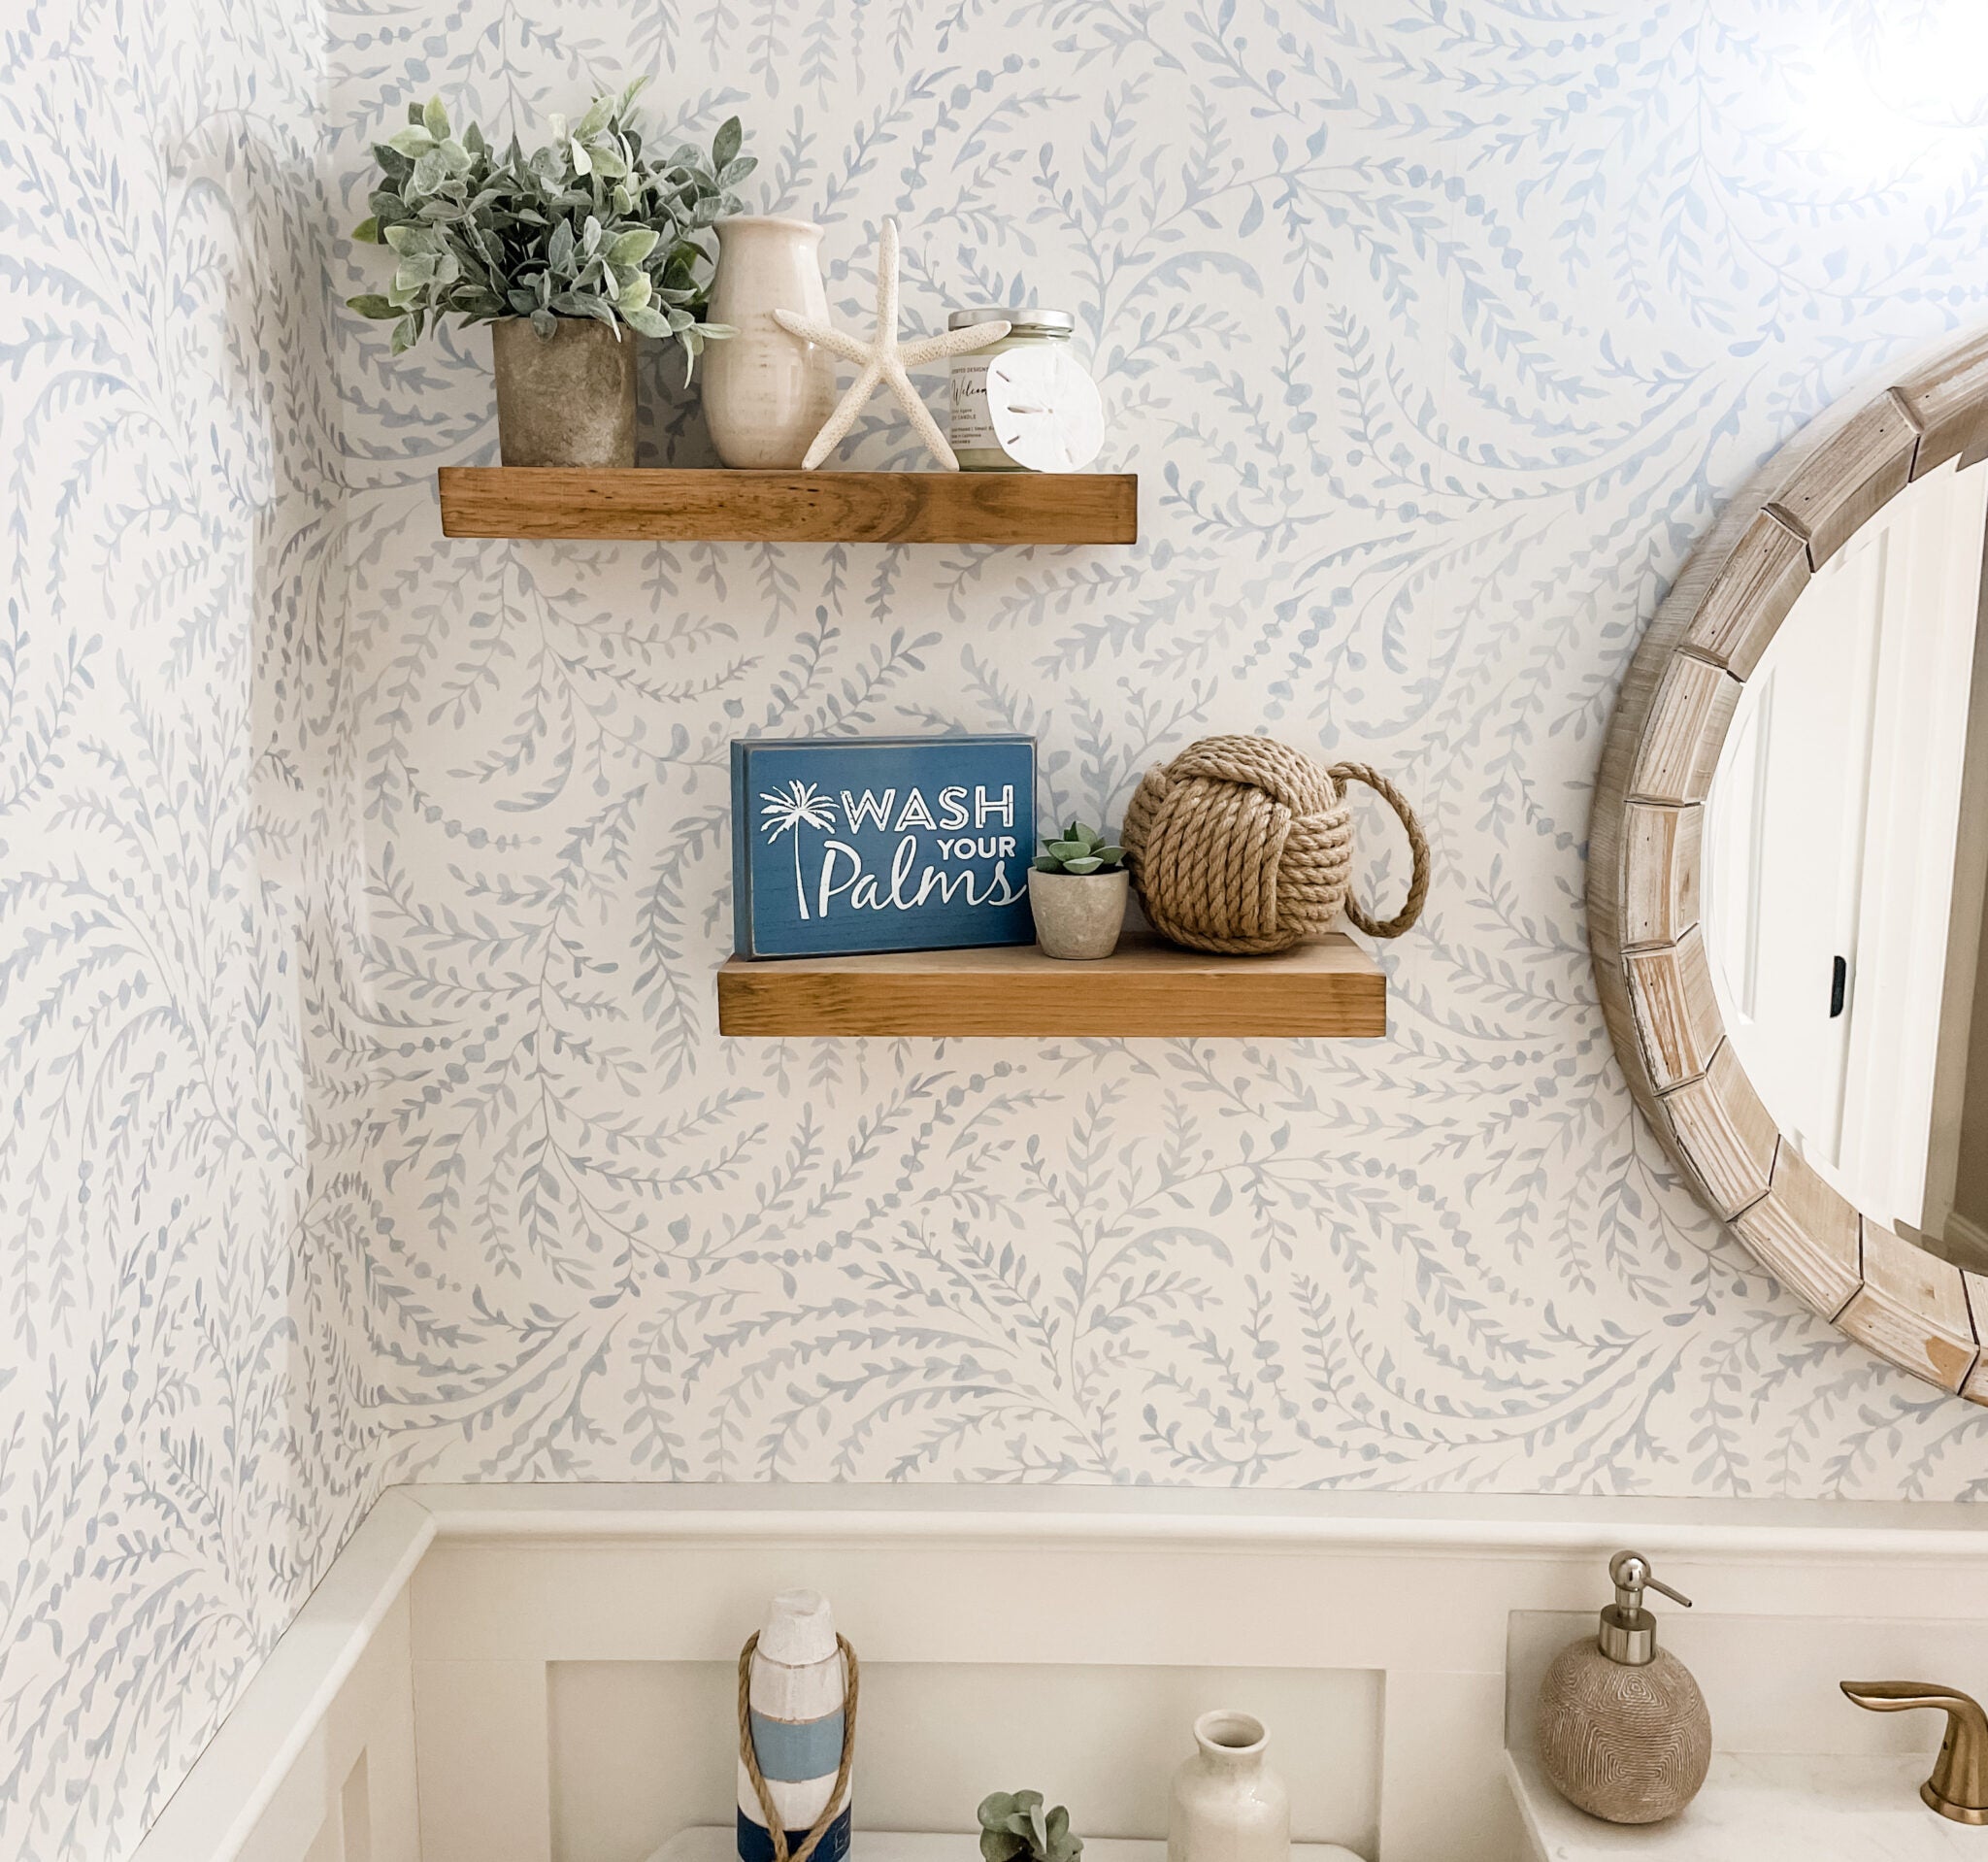 How to Decorate Floating Shelves in Bathroom: 9 Tricks to Know